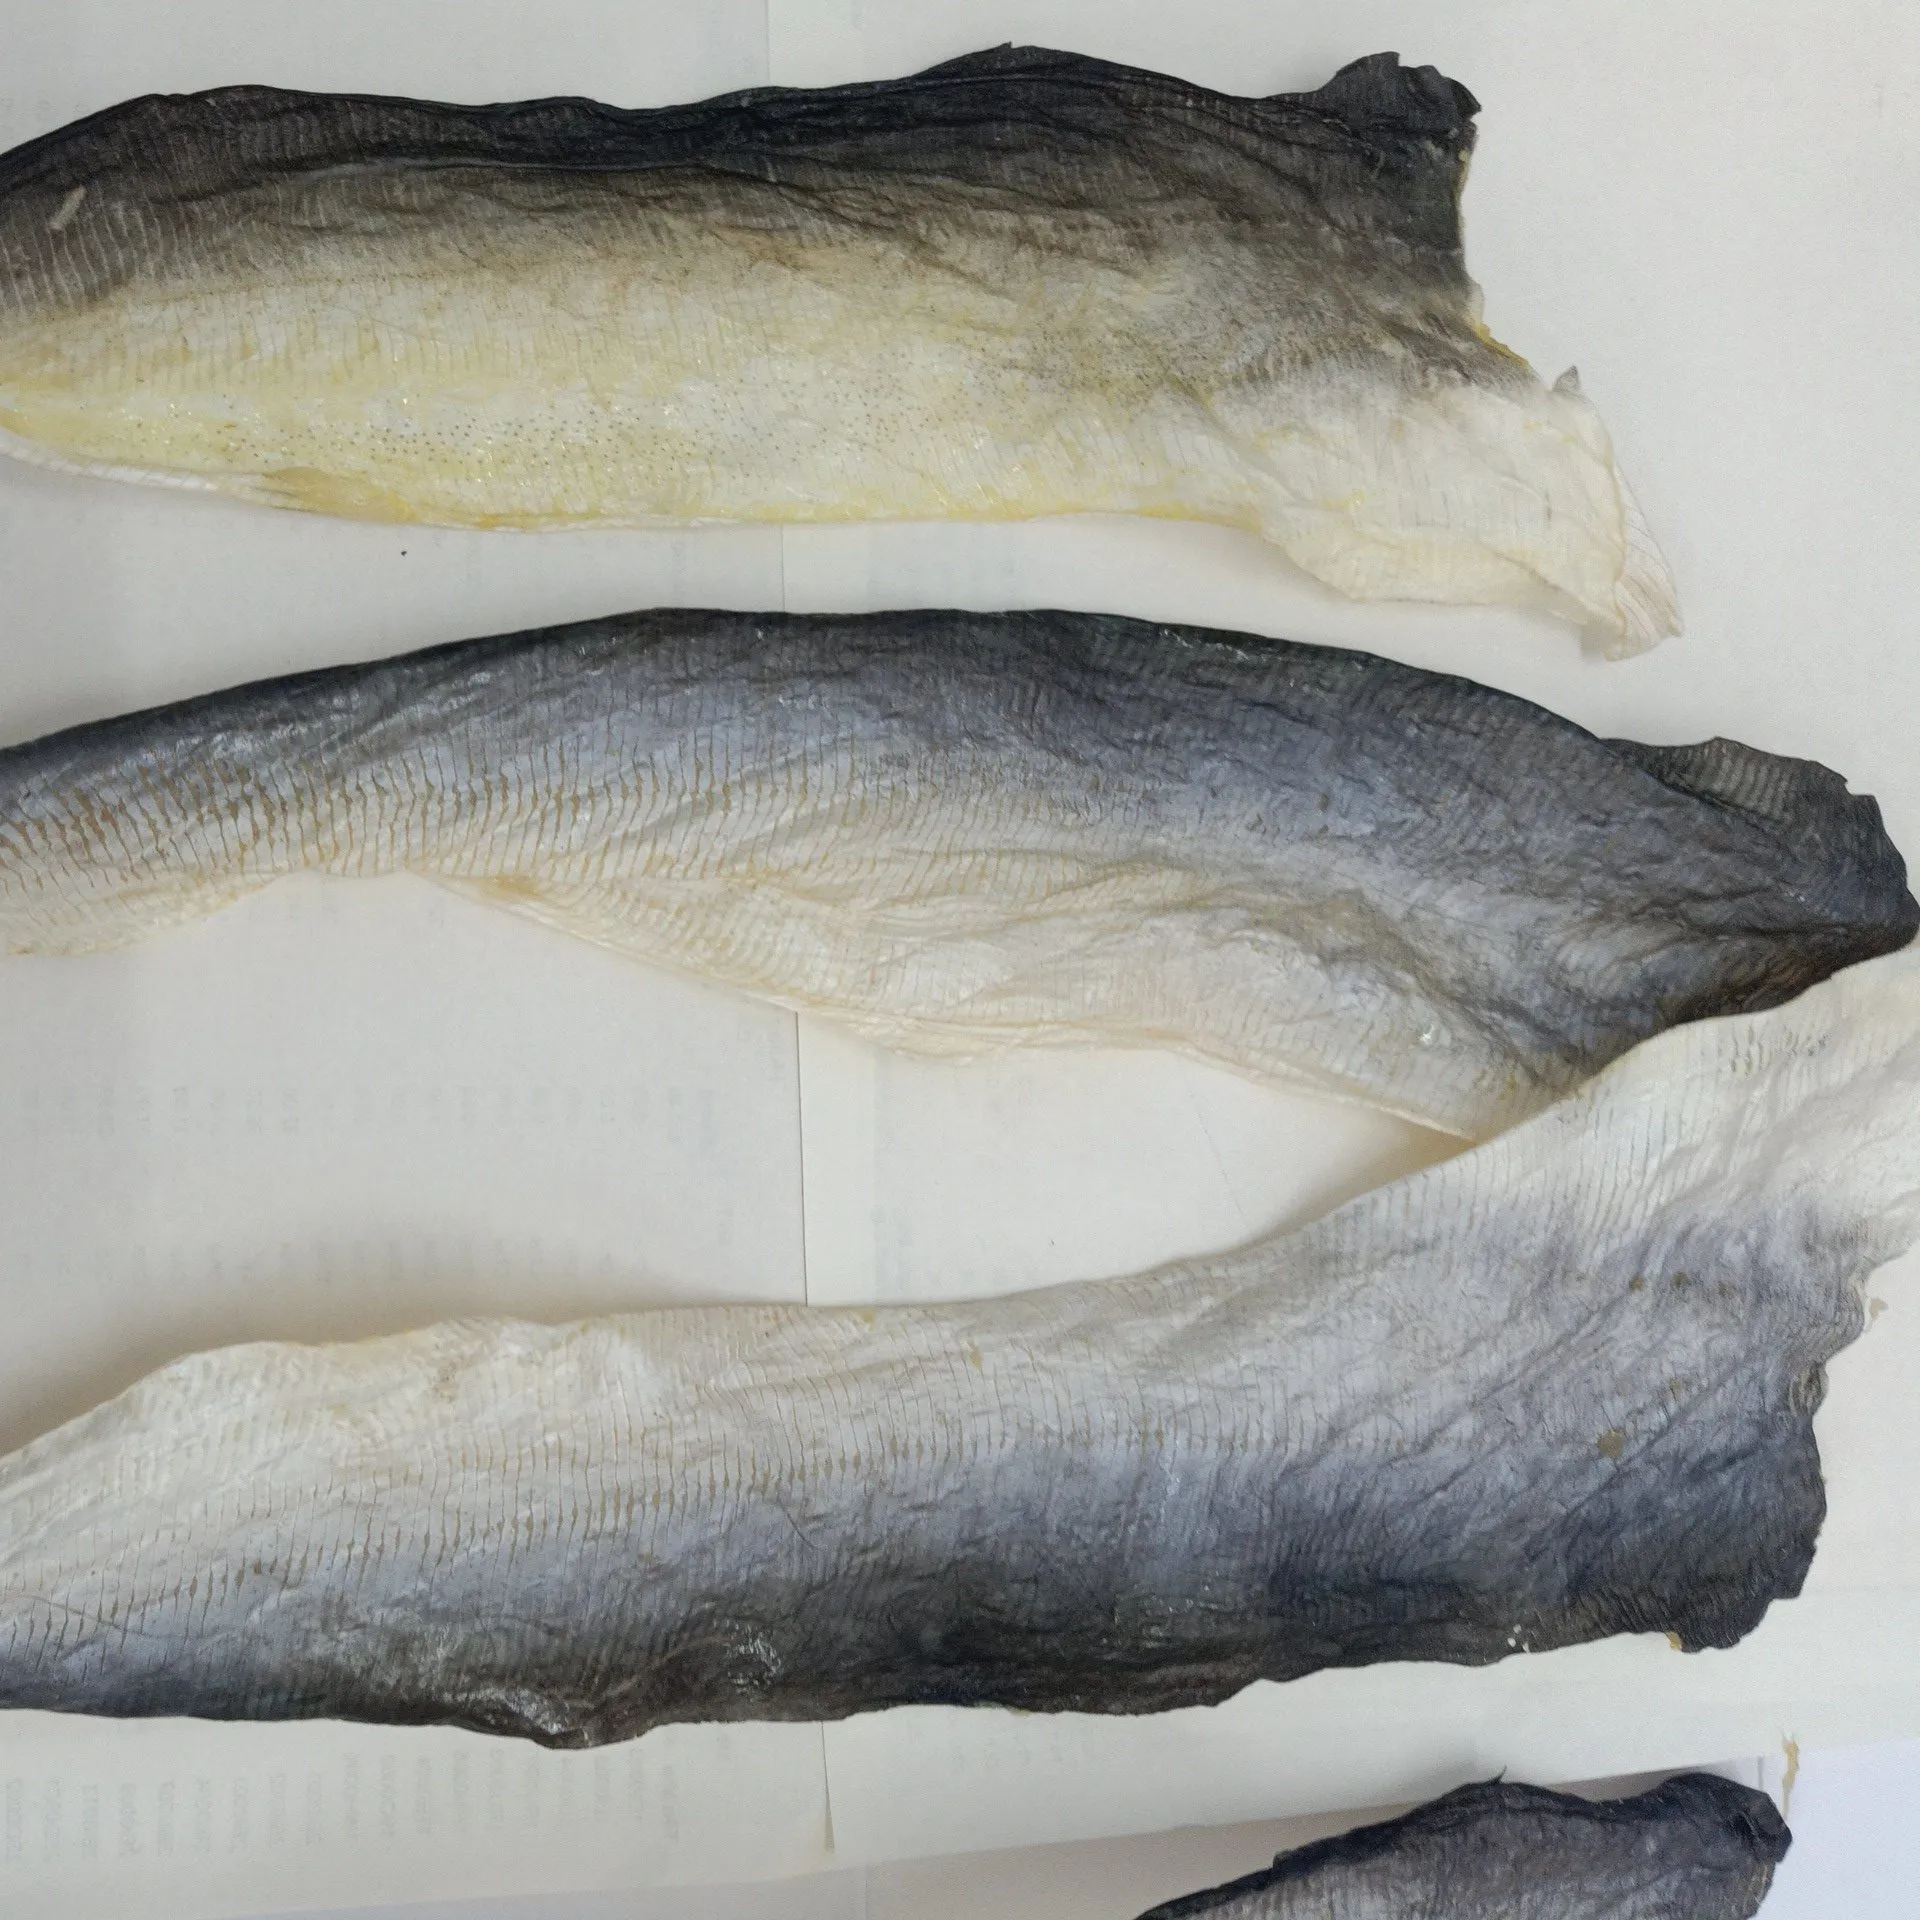 BEST PRICE skin fish pangasius delicious snack food skin fish high quality seafood MR PORTER +84896612931